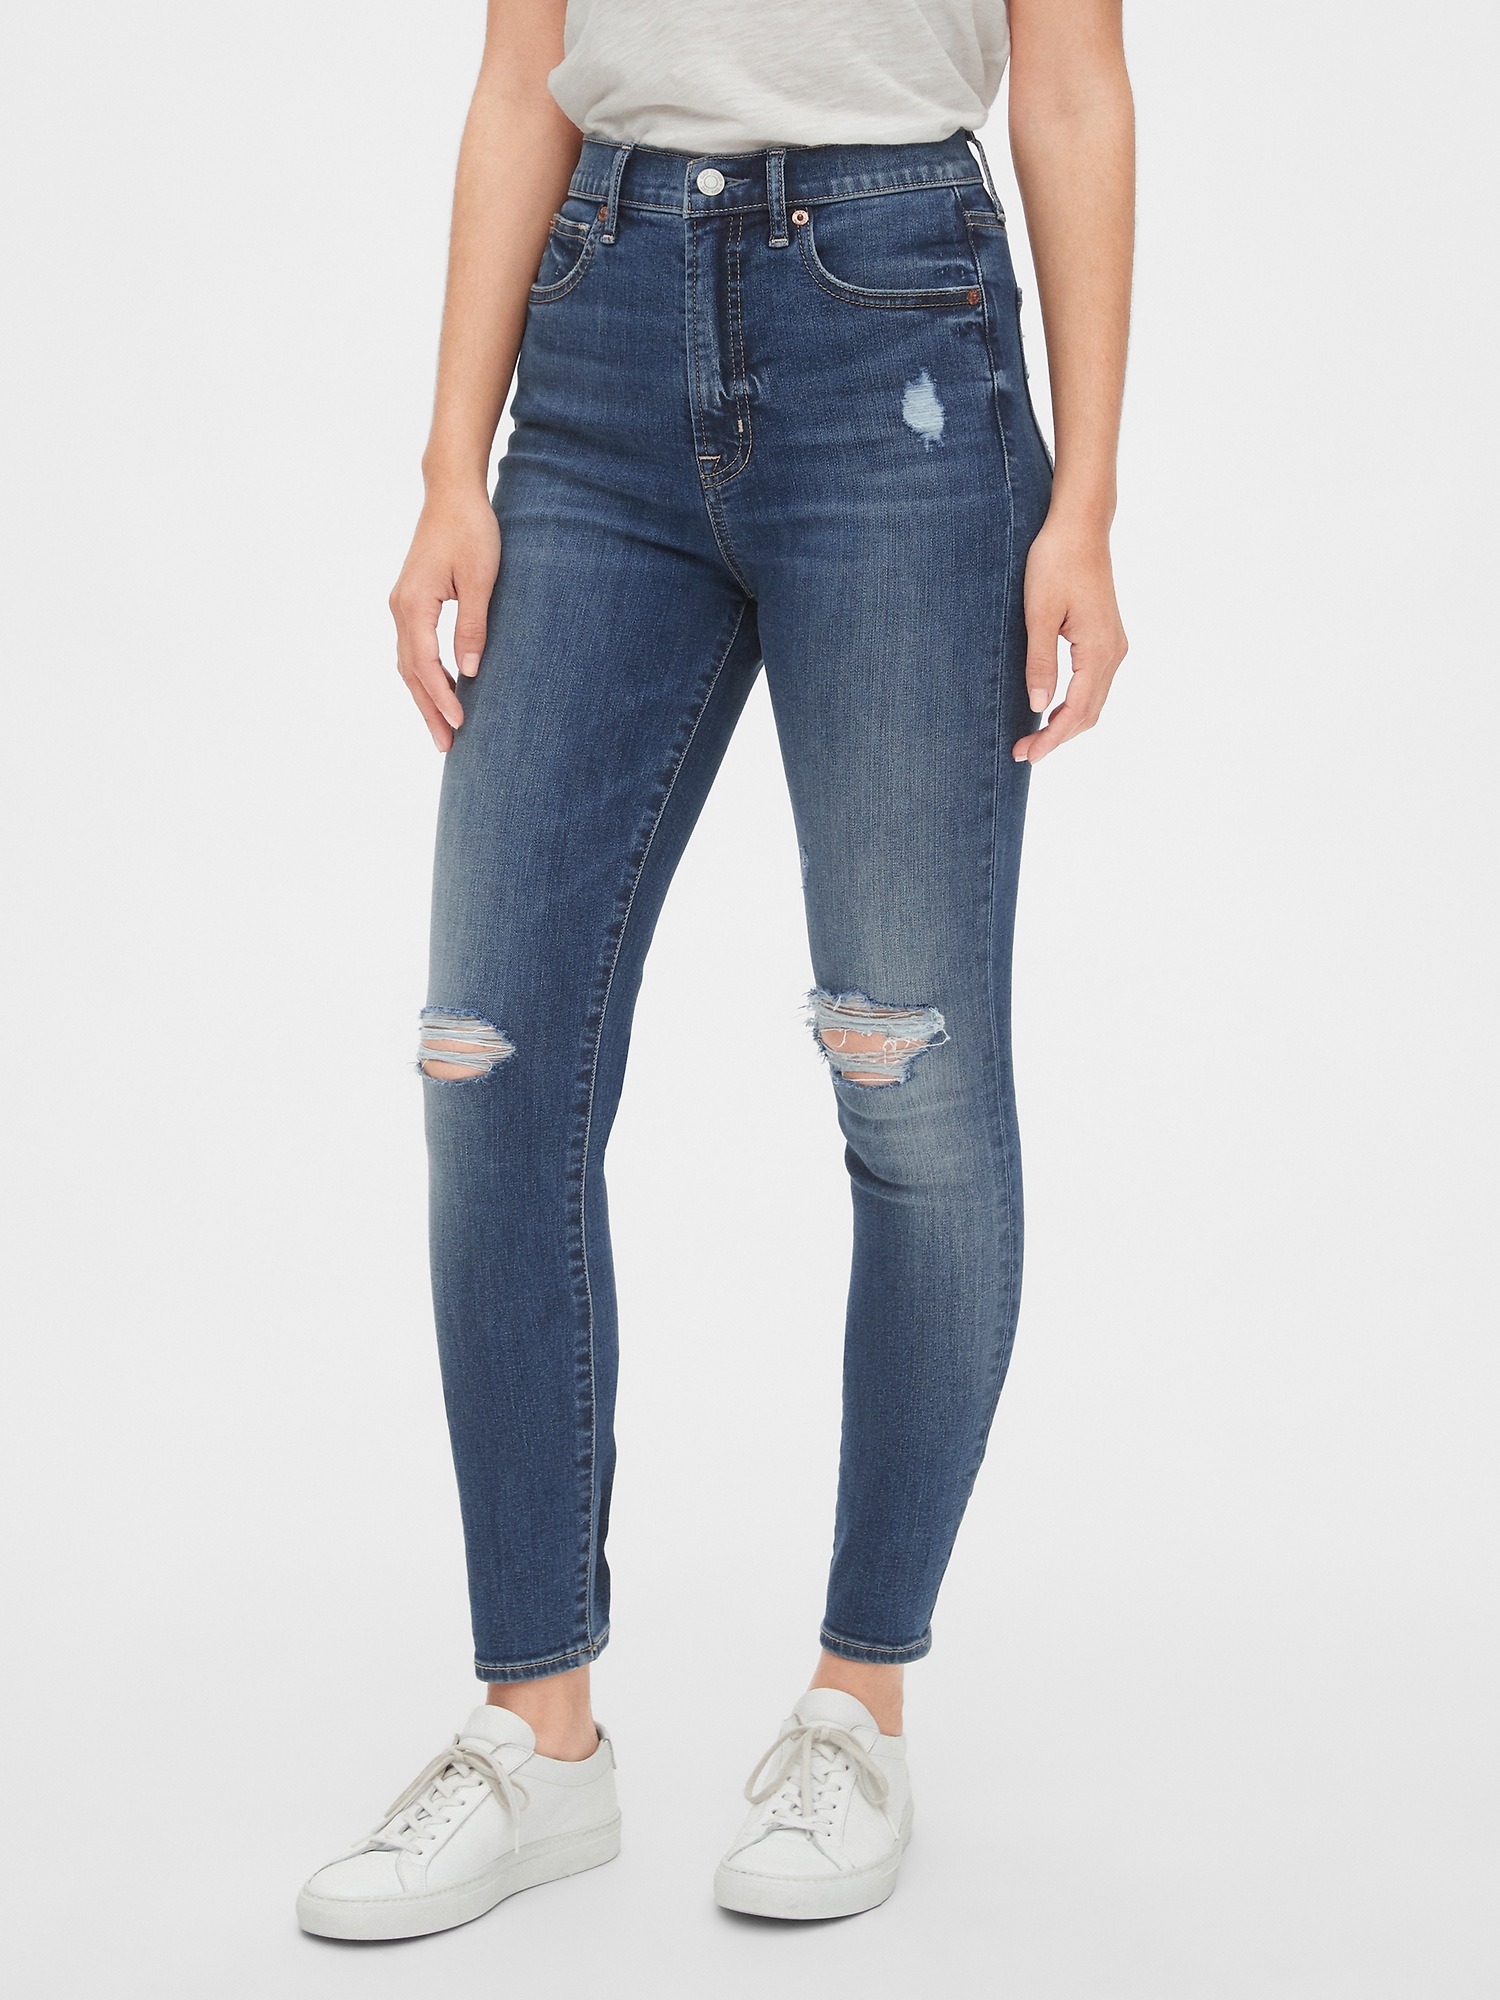 gap ripped jeans